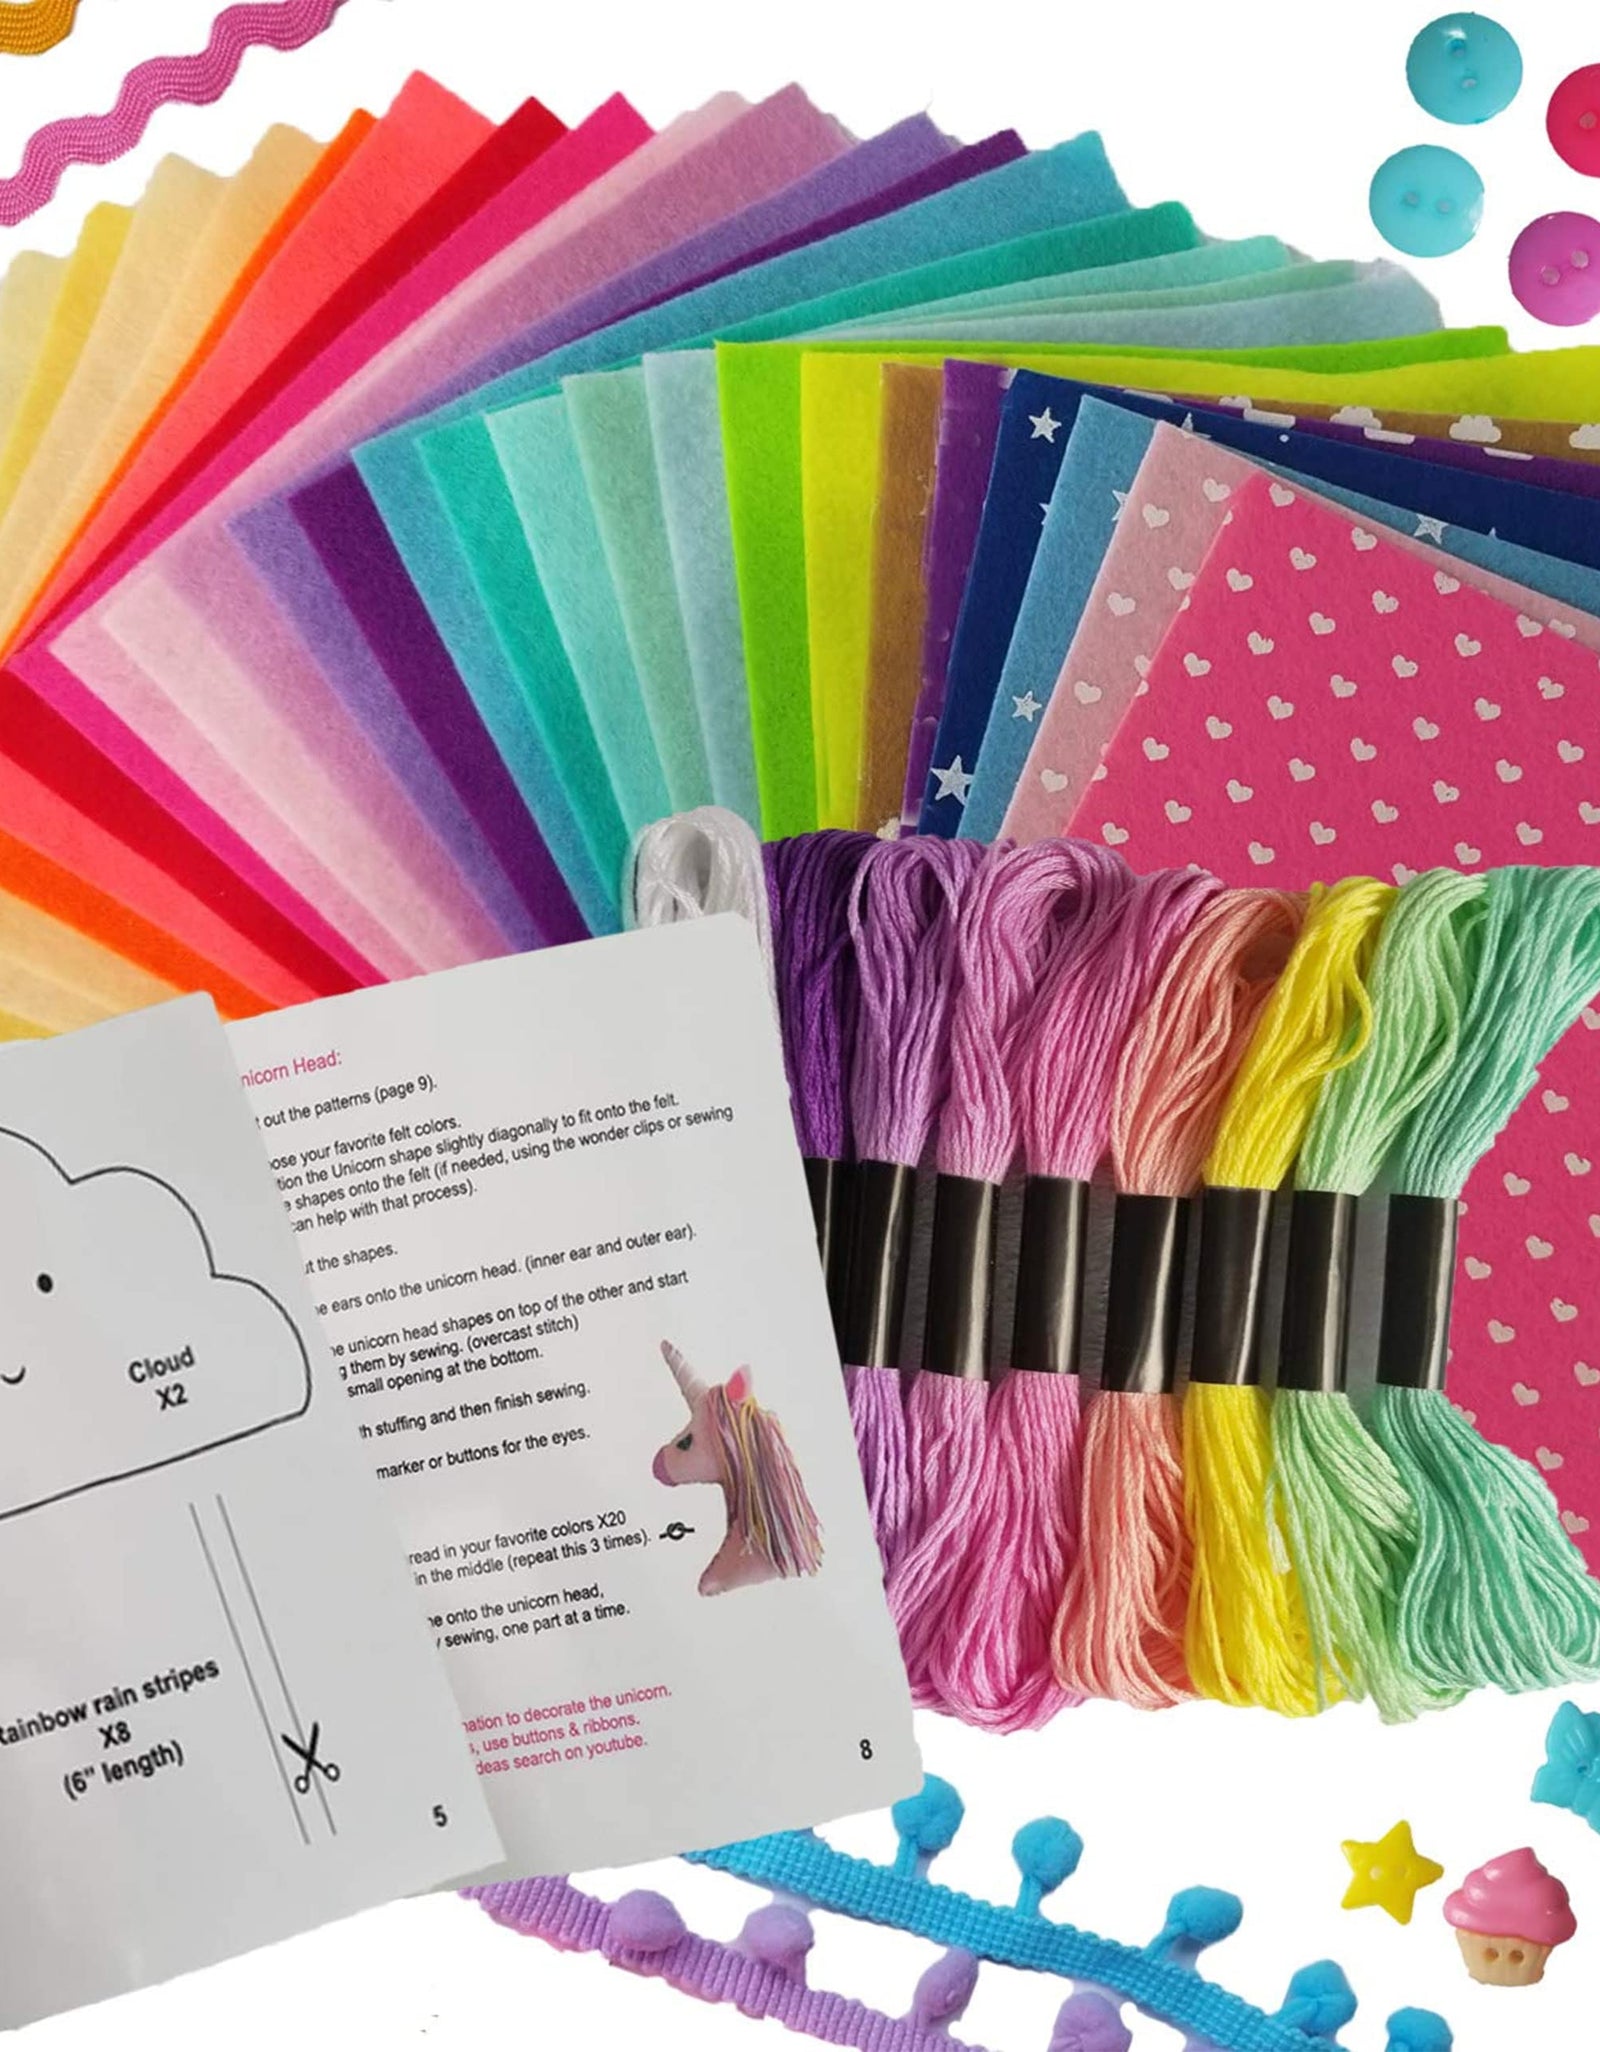 ARTIKA Sewing KIT for Kids, DIY Craft for Girls, The Most Wide-Ranging Kids Sewing Kit Kids Sewing Supplies, Includes a Booklet of Cutting Stencil Shapes for The First Step in Sewing. (Unicorn kit)